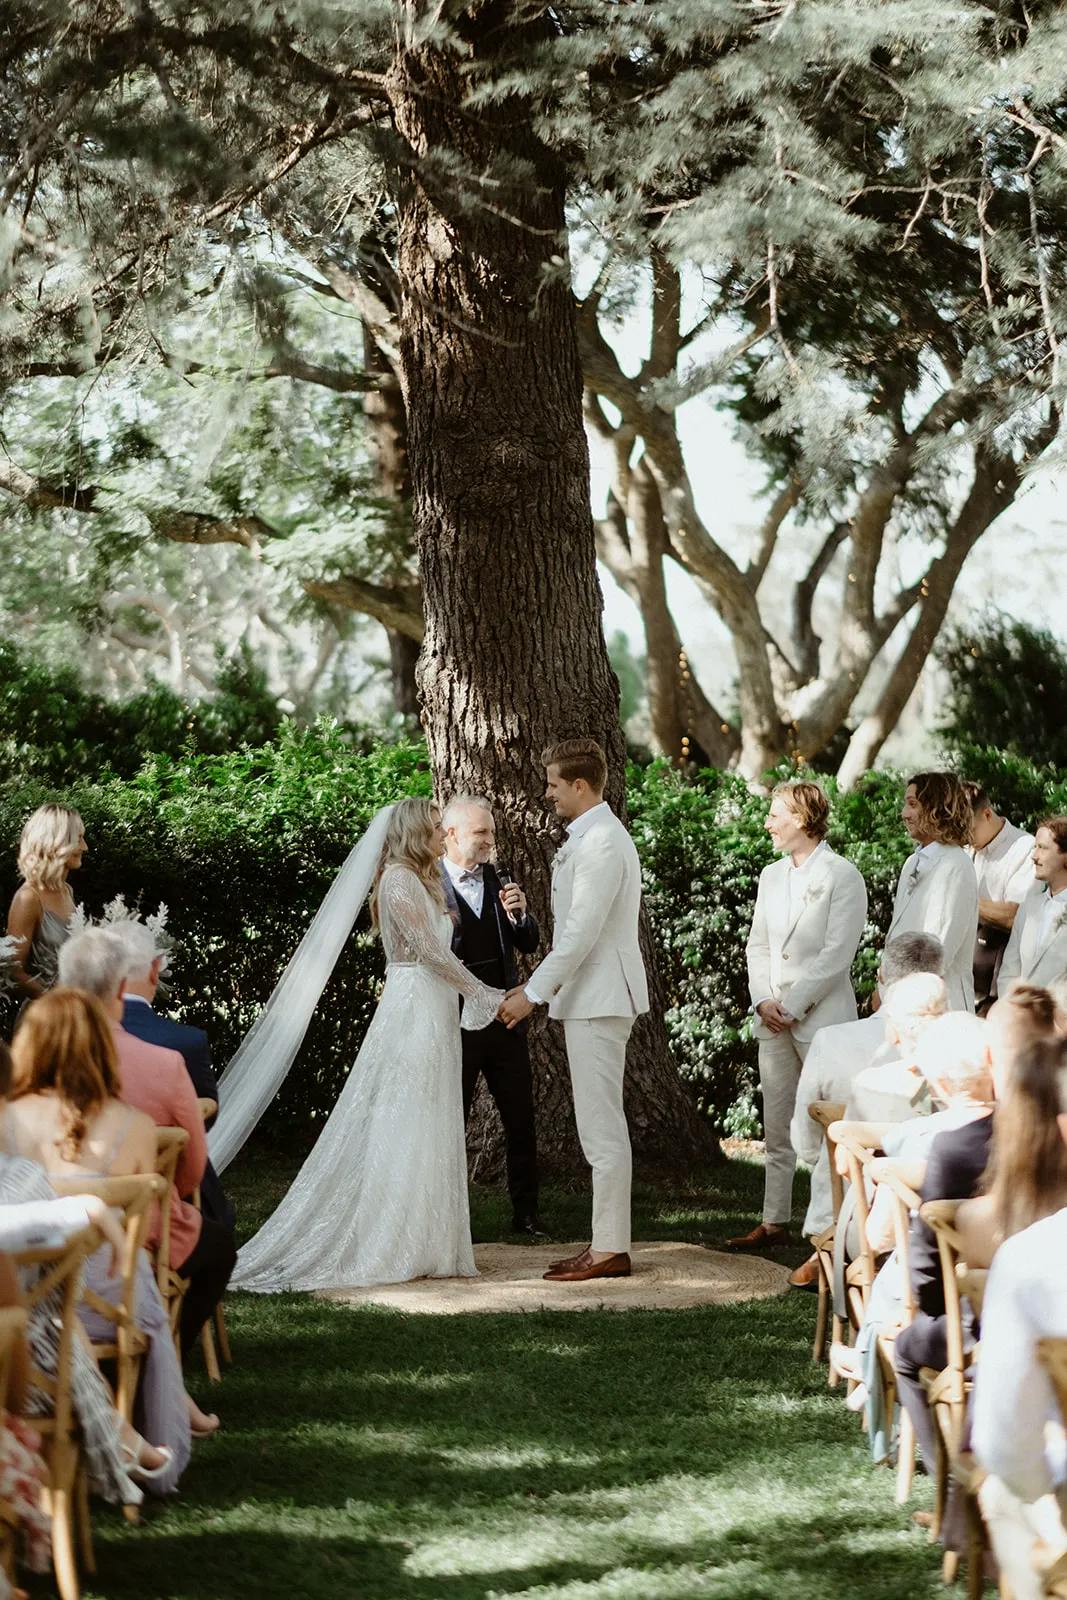 A bride and groom stand before an officiant, holding hands under a large tree during their outdoor wedding ceremony. Bridesmaids and groomsmen dressed in light-colored attire stand on either side, and guests are seated, watching attentively in the background.